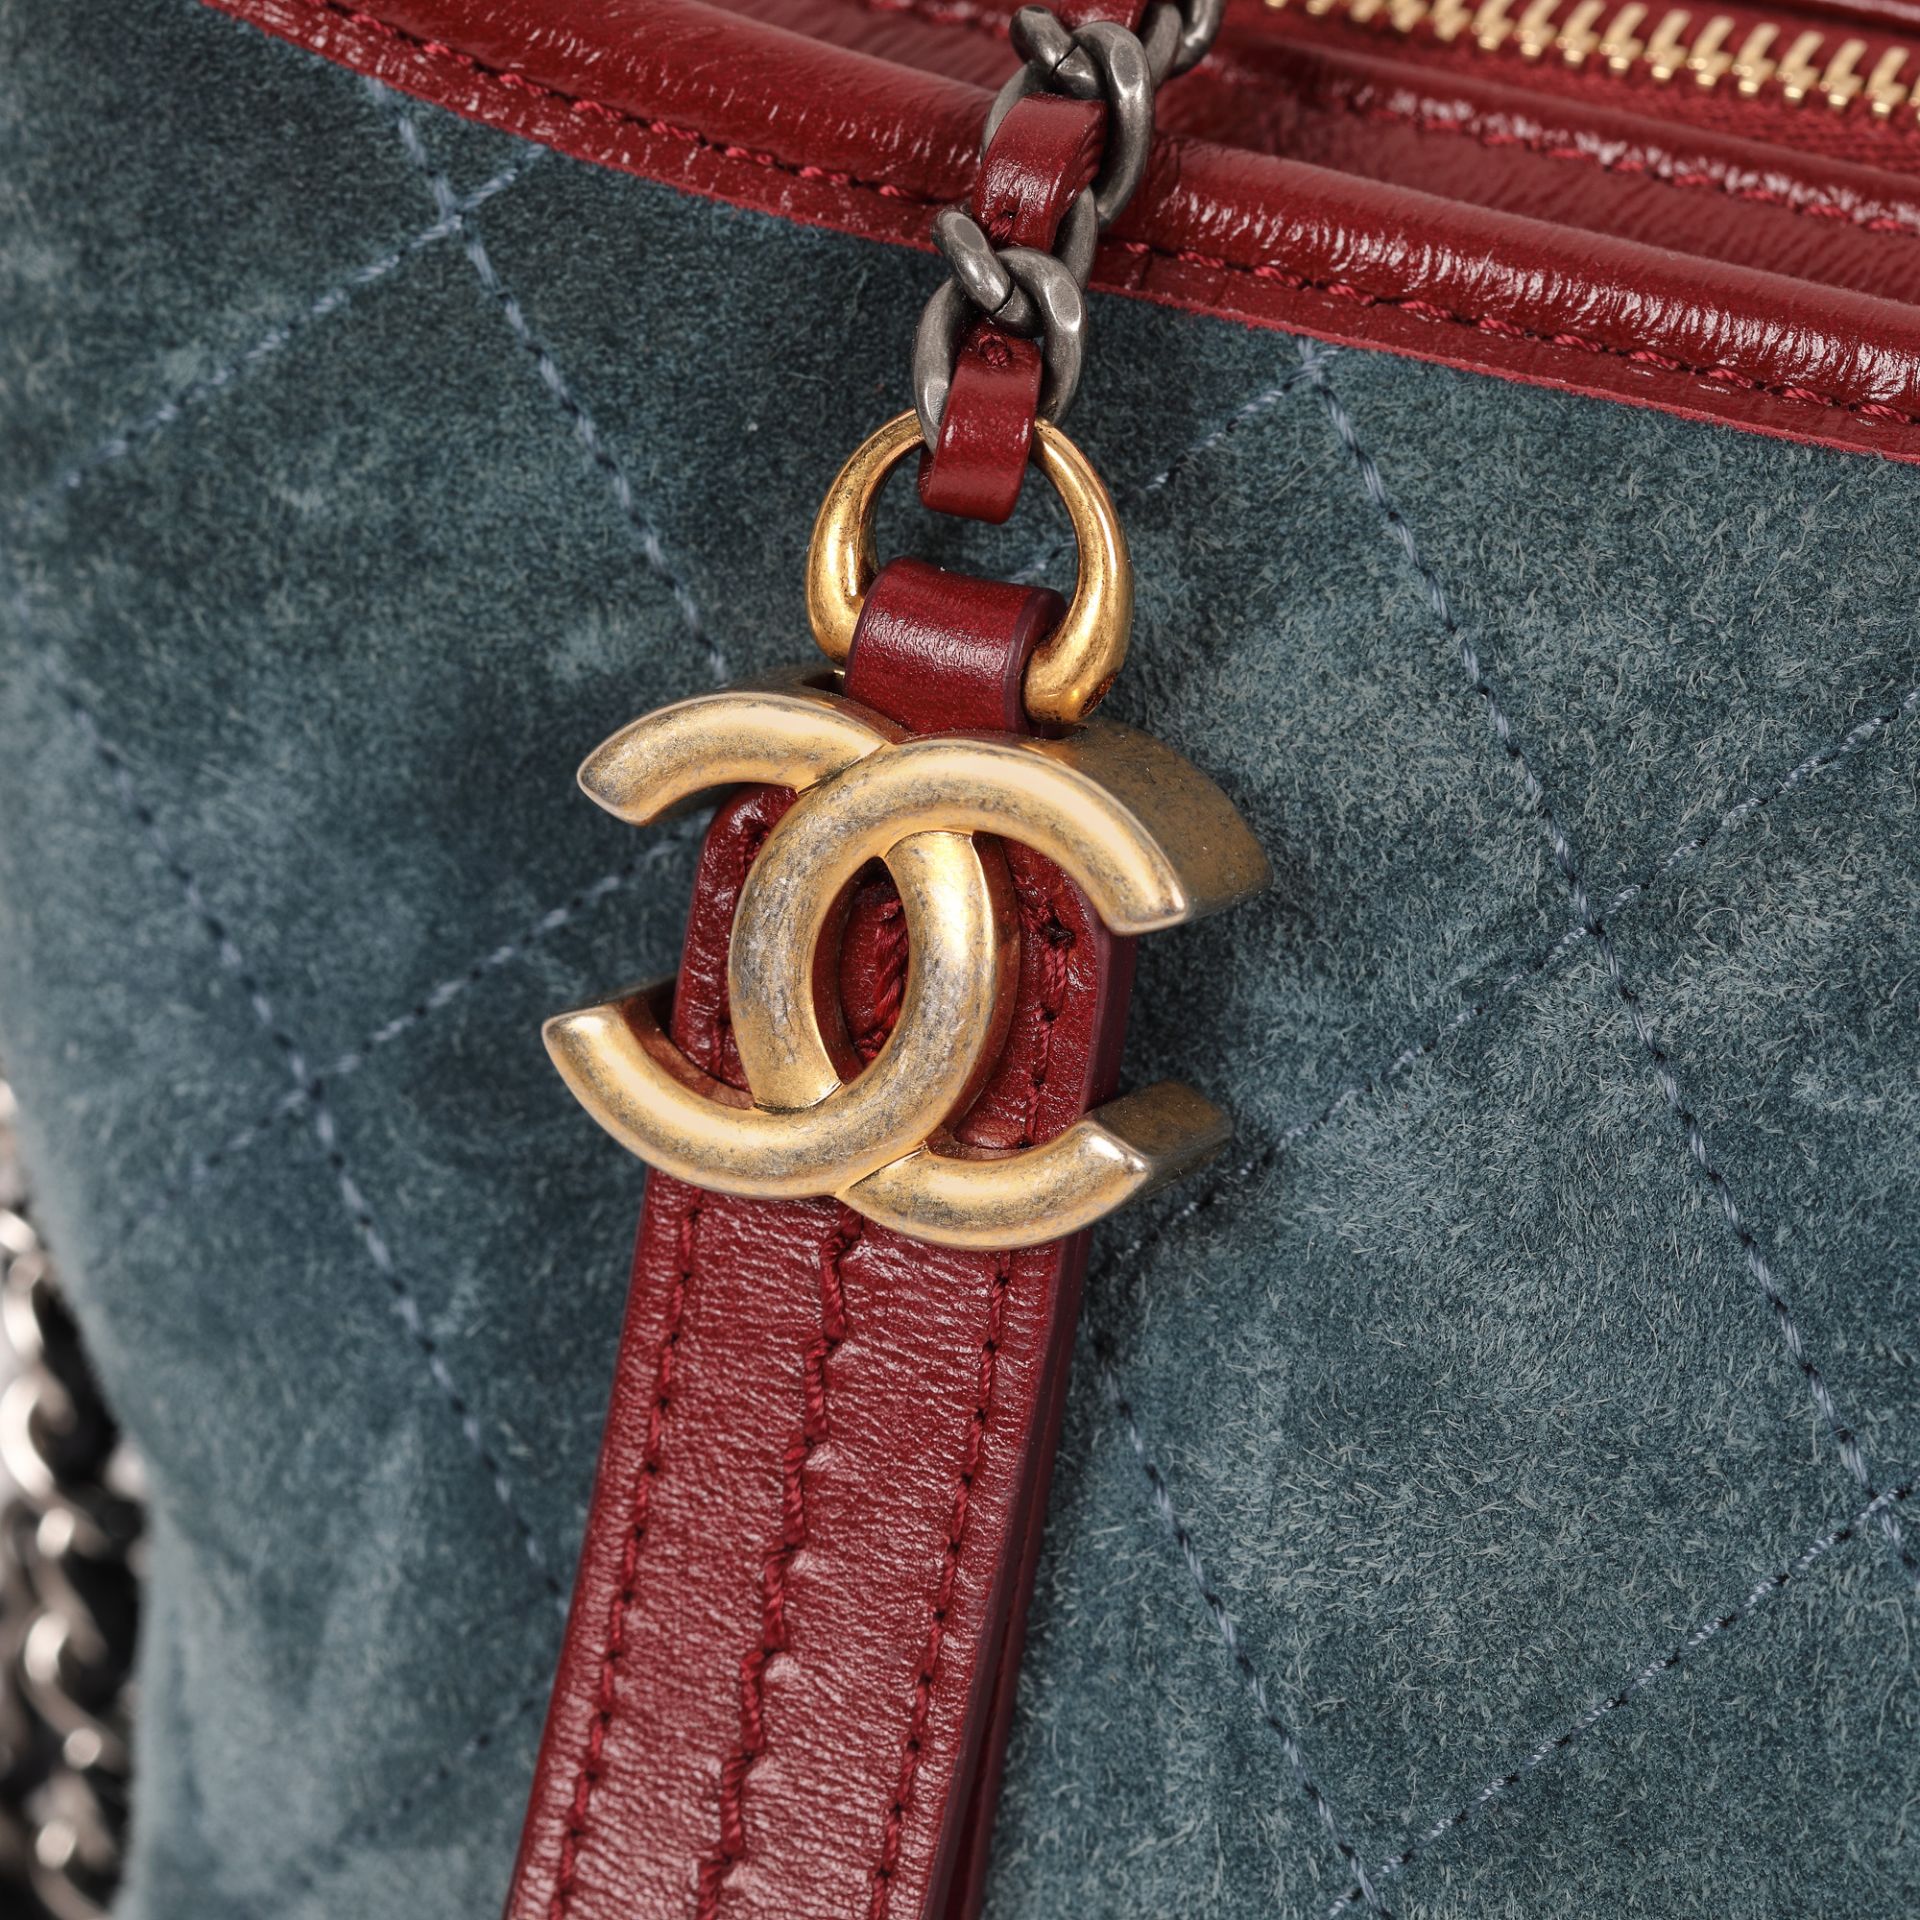 "Tri-Colour Gabrielle" - Chanel bag, leather, partially quilted - Image 2 of 4